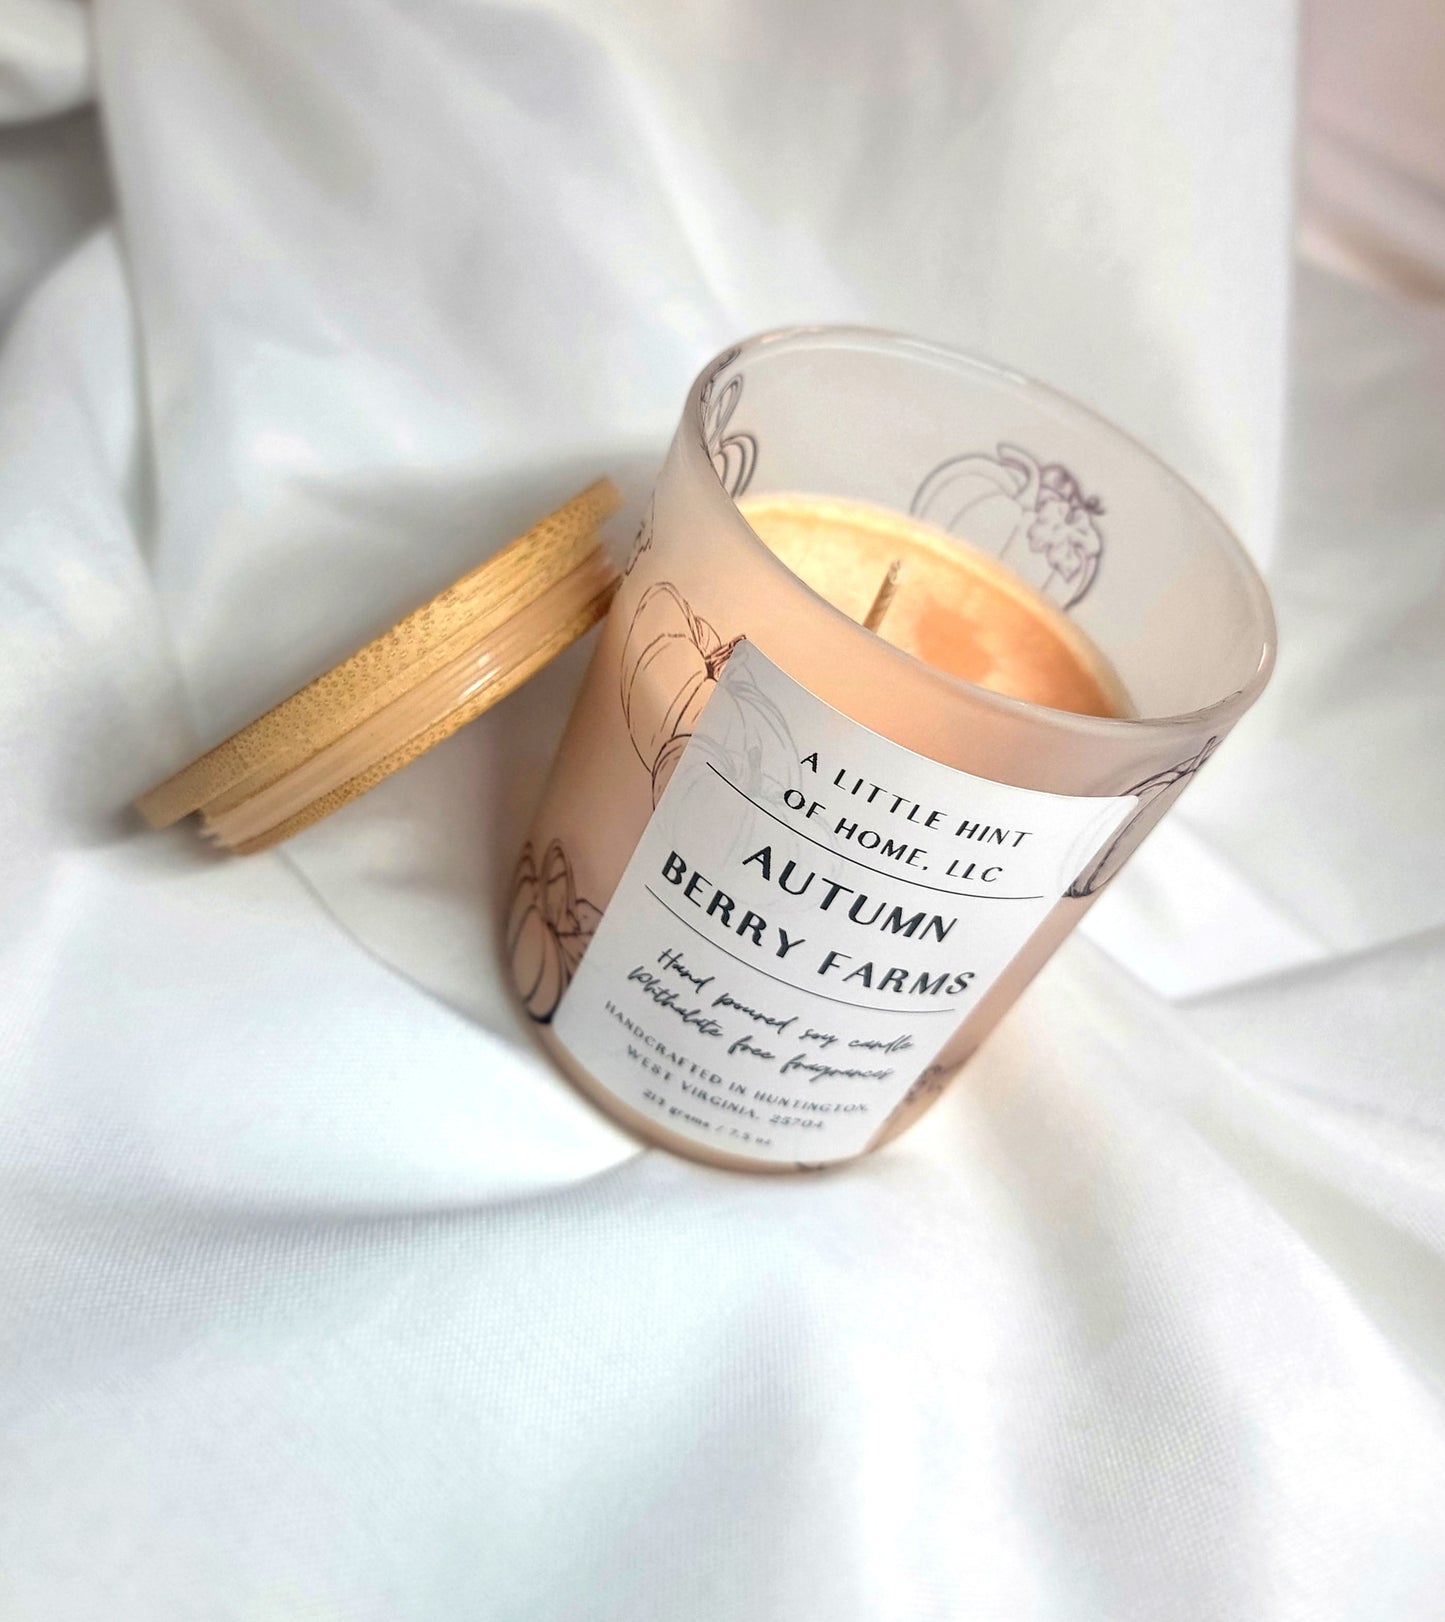 Autumn Berry Farms Soy Wax Candle